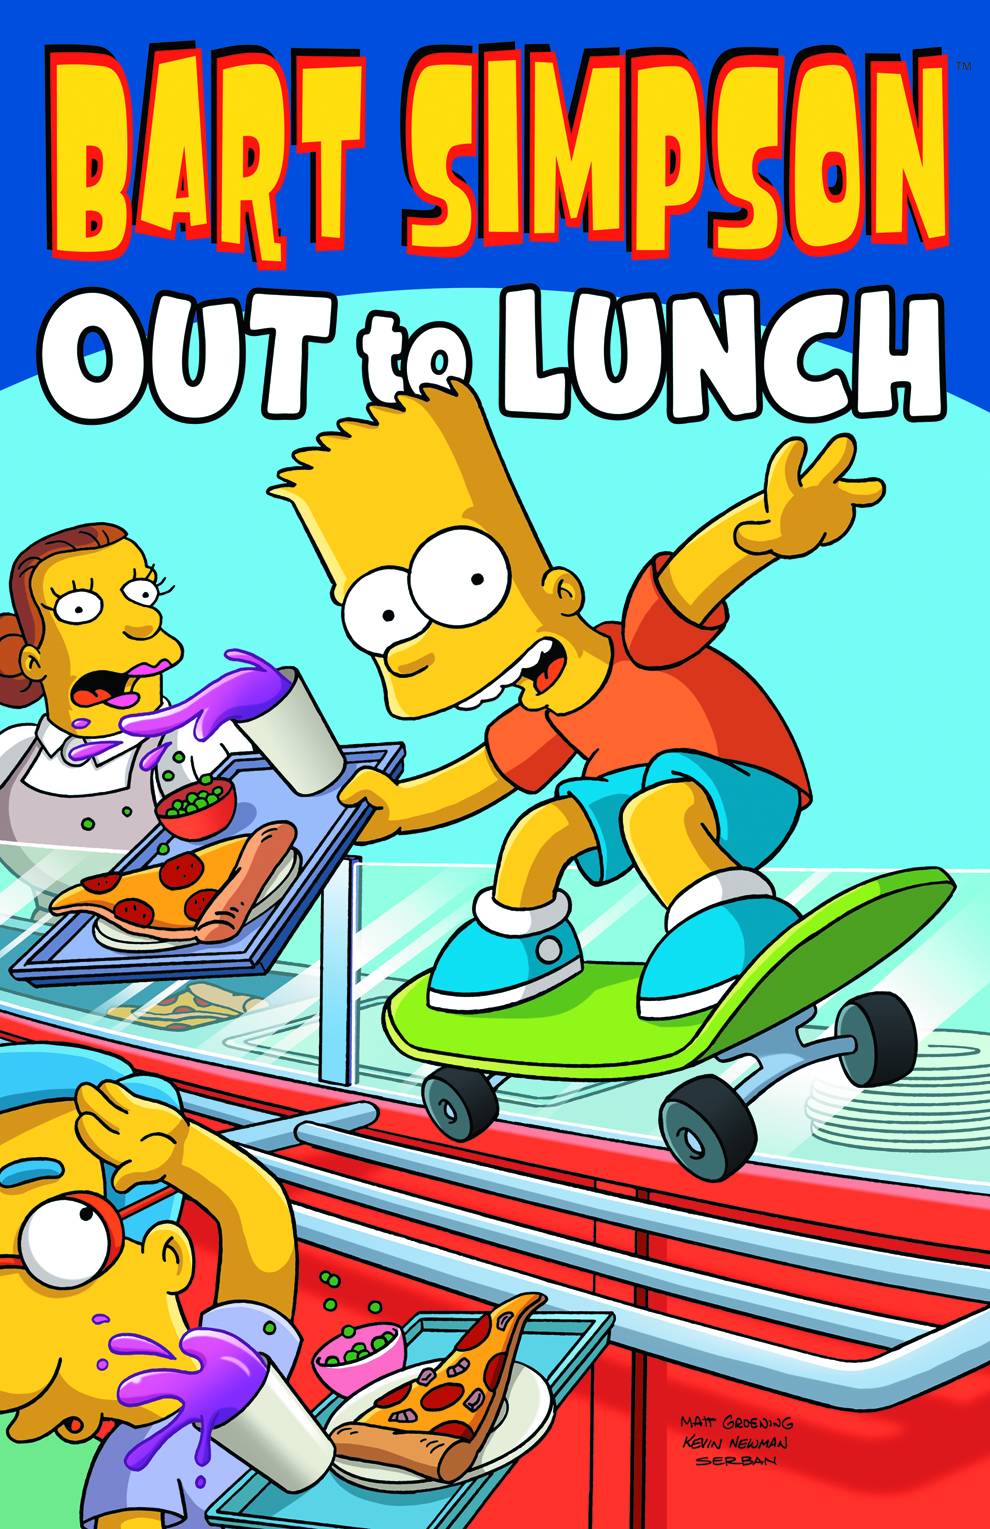 Bart Simpson Out To Lunch Graphic Novel